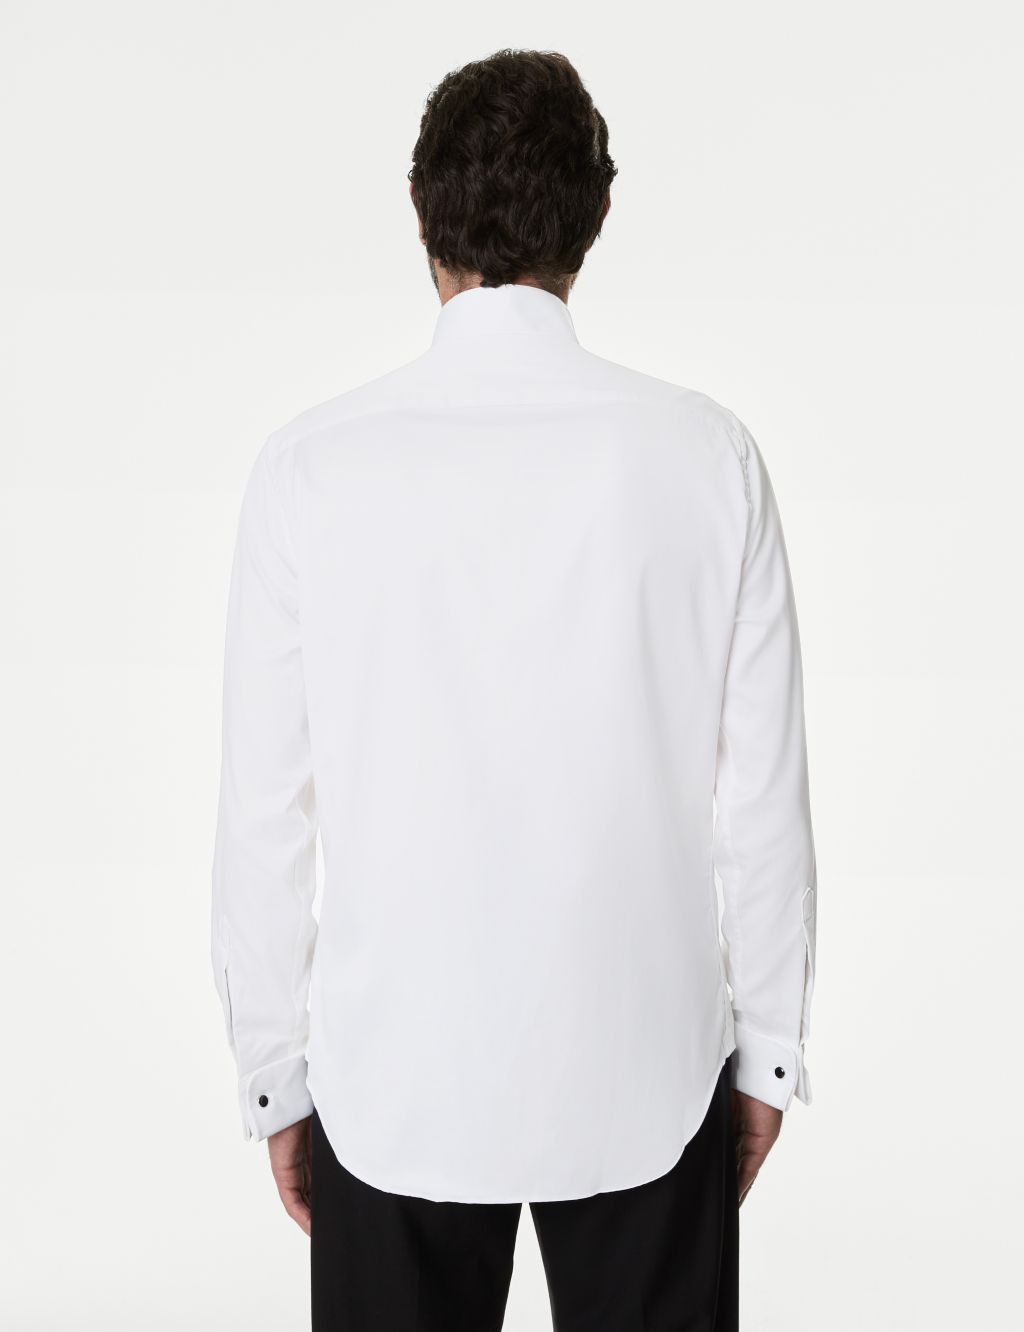 Tailored Fit Luxury Cotton Double Cuff Dress Shirt 8 of 8